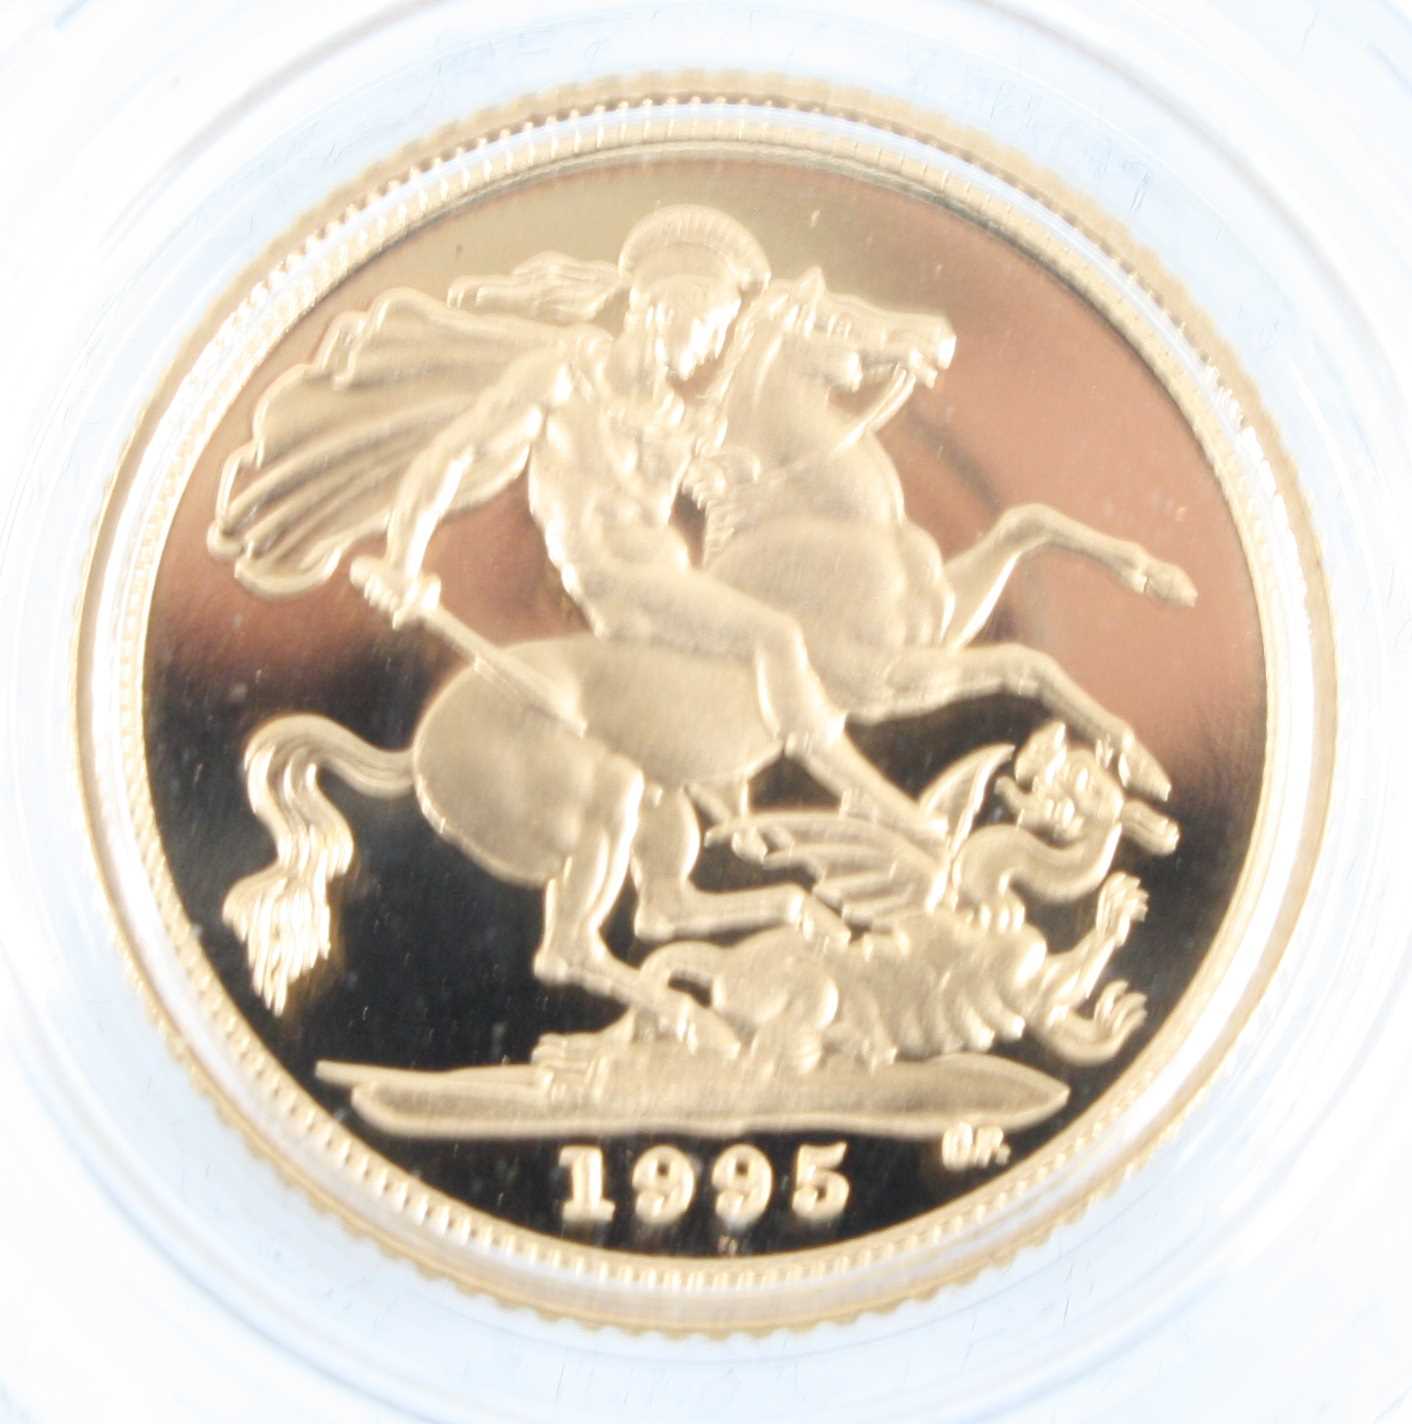 Great Britain, 1995 gold proof half sovereign, Elizabeth II, rev; St George and Dragon above date, - Image 3 of 3